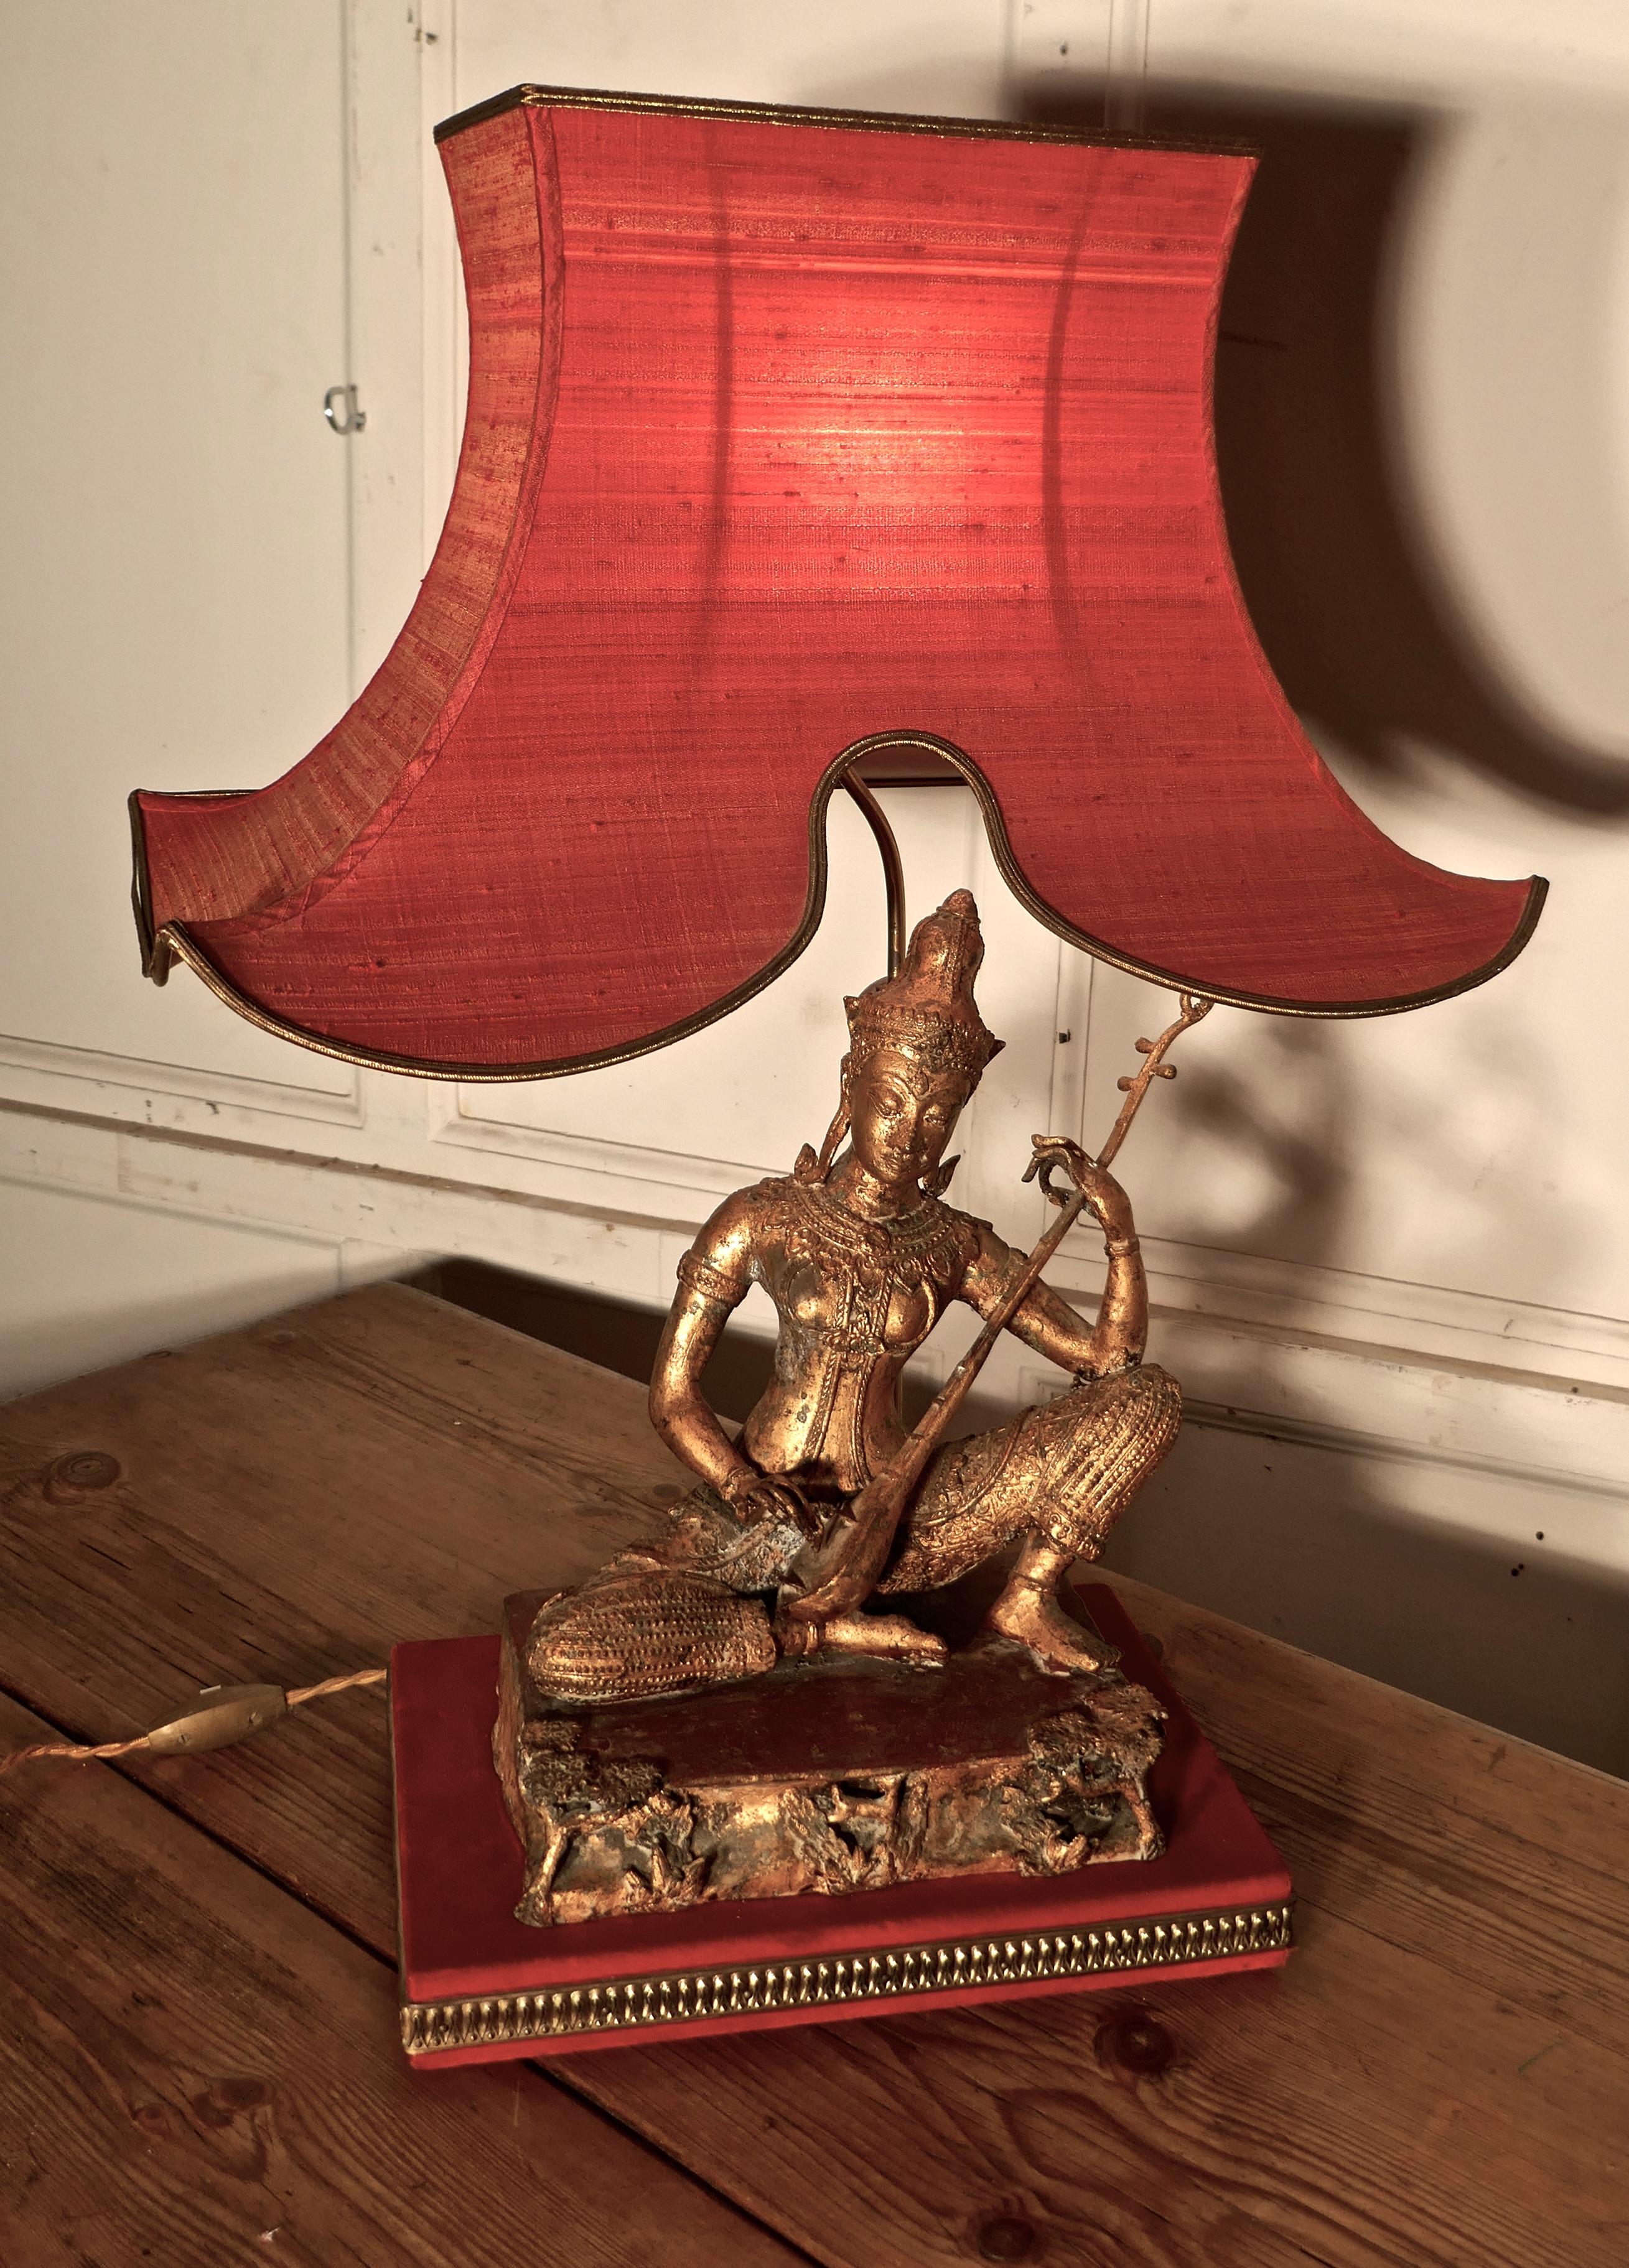 Gilded bronze seated Buddha table lamp


This is an excellent piece with an oriental theme

The Female bronze statue is seated playing a sitar, it has an old worn gold finish and this is set on a metal platform which is decorated in fine detail